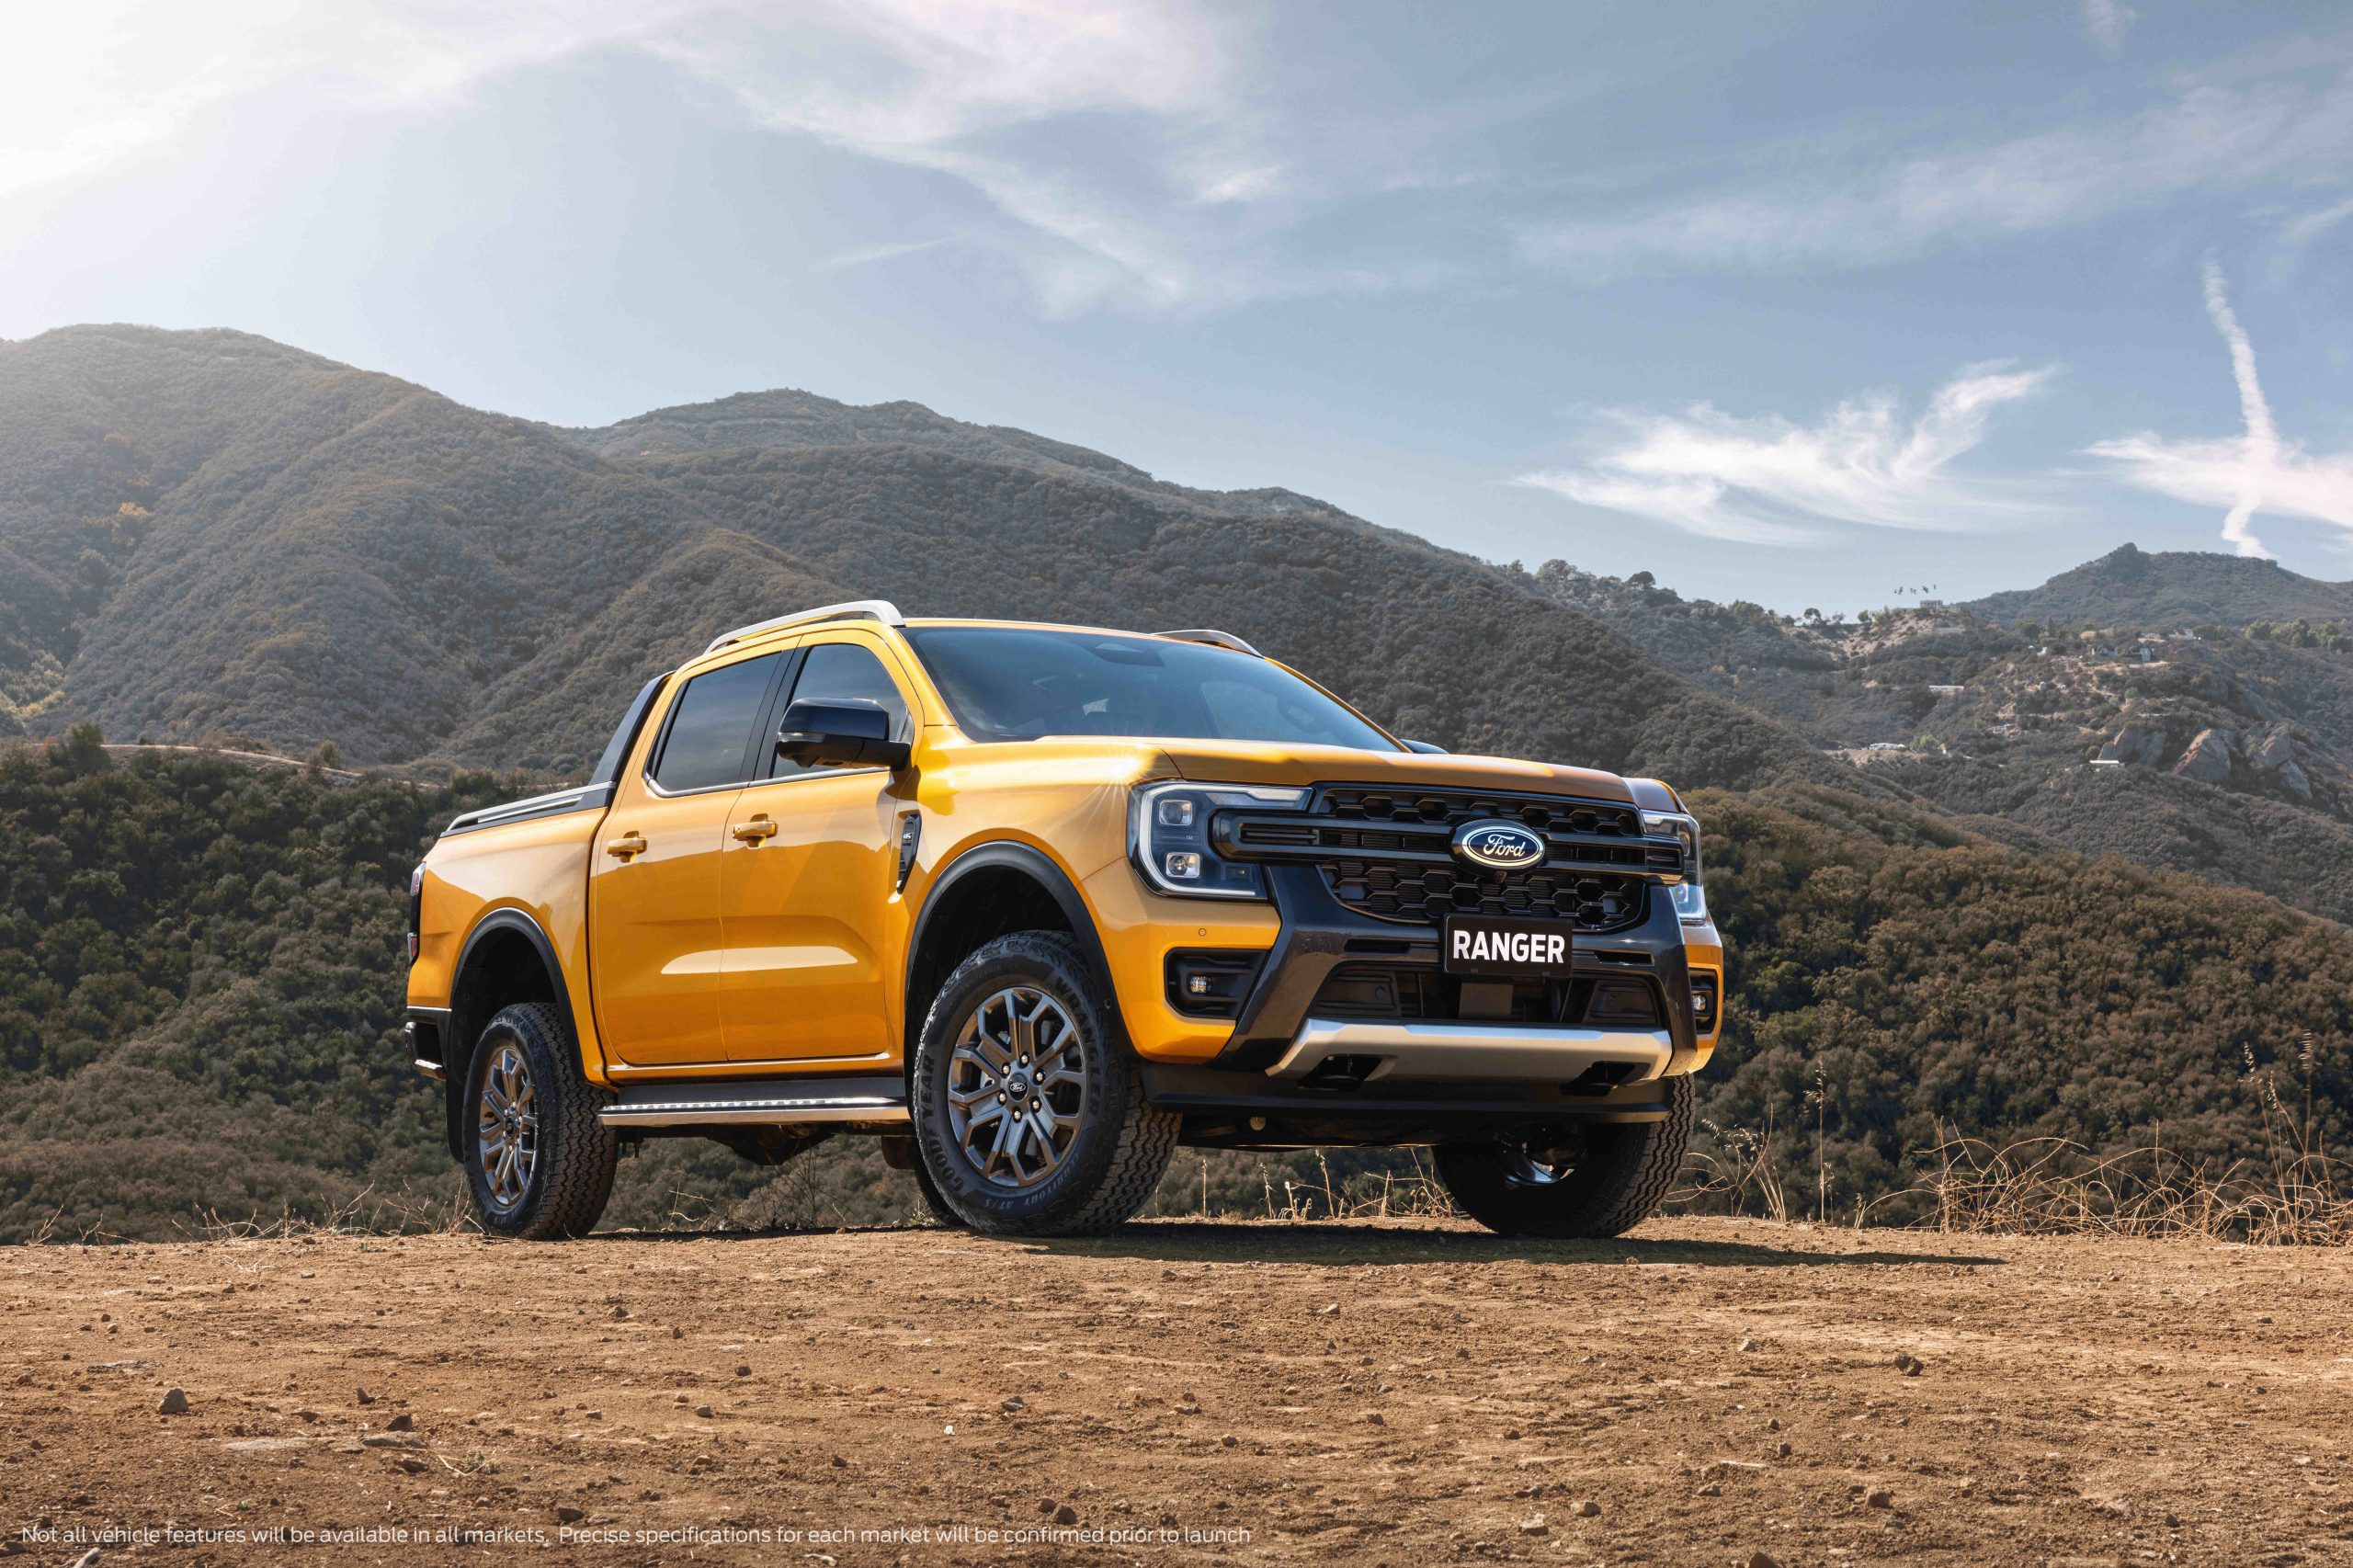 Ford Philippines opens reservations for 2023 Ford Ranger, announces starting retail price of P1,198,000